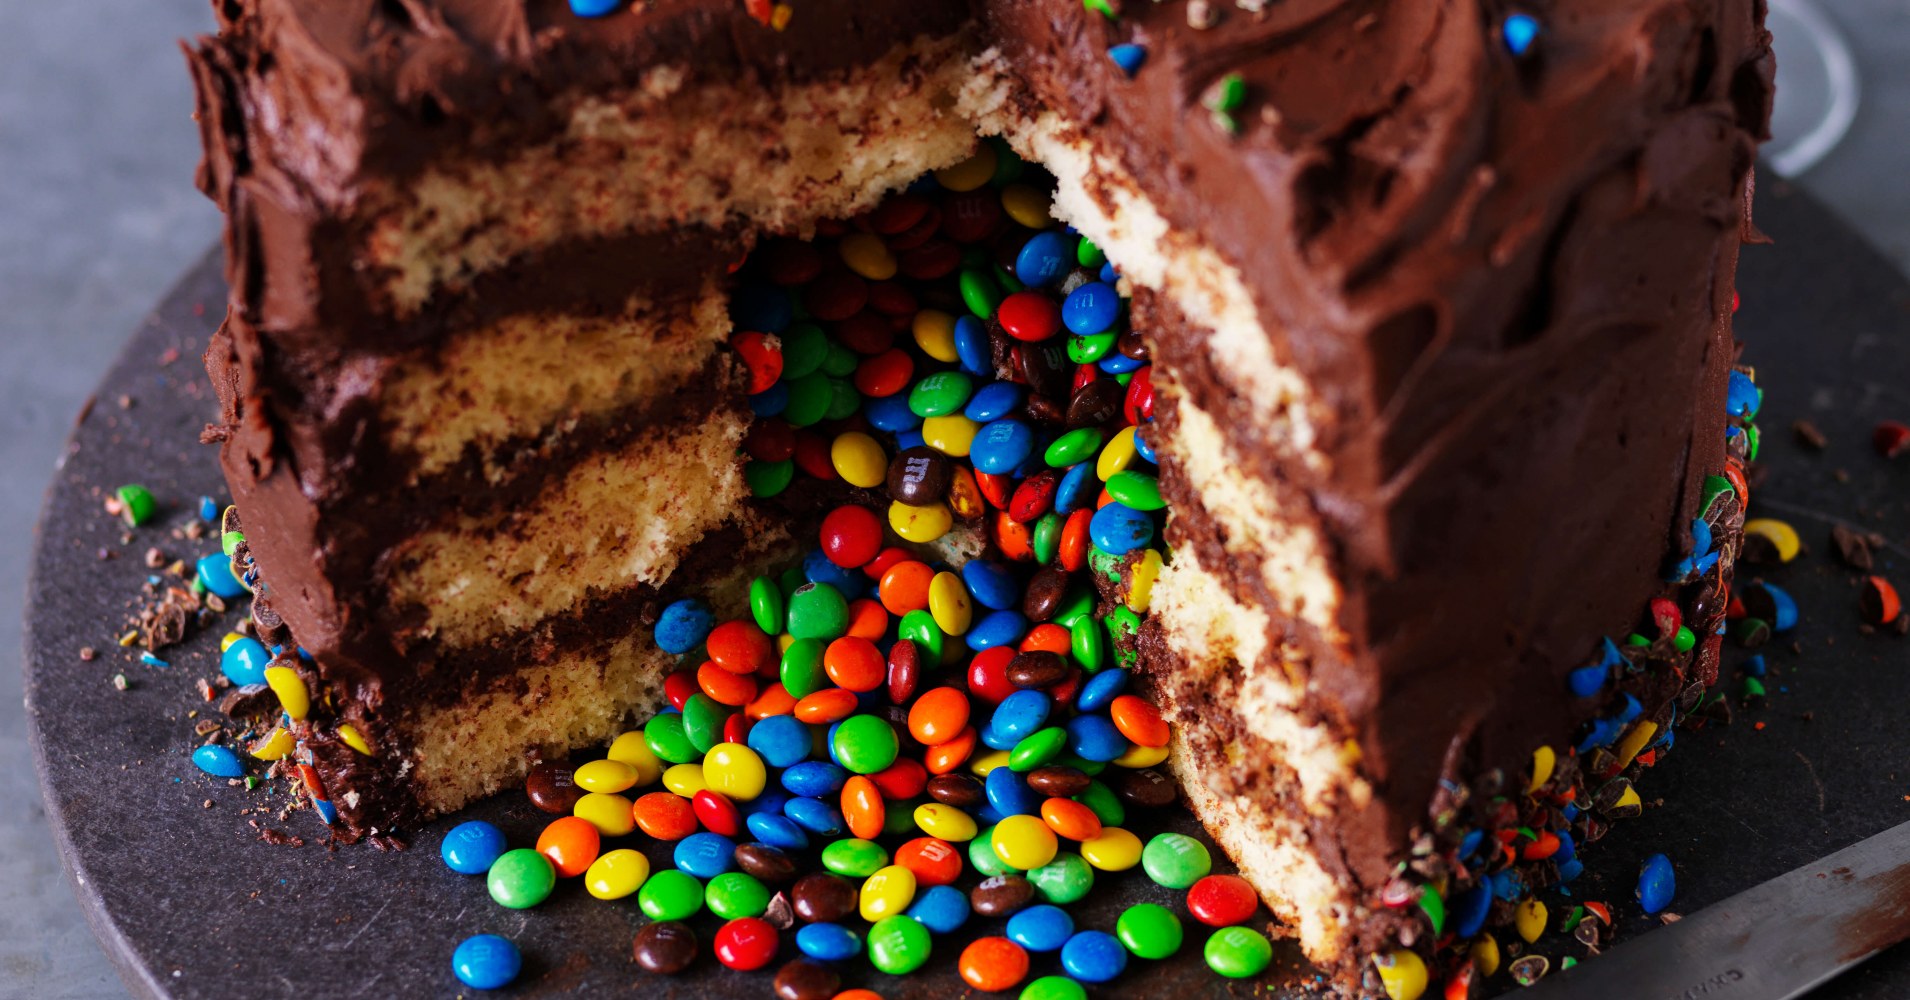 10 Surprise Cake Recipes – How to Make Cakes Hide A Major Surprise